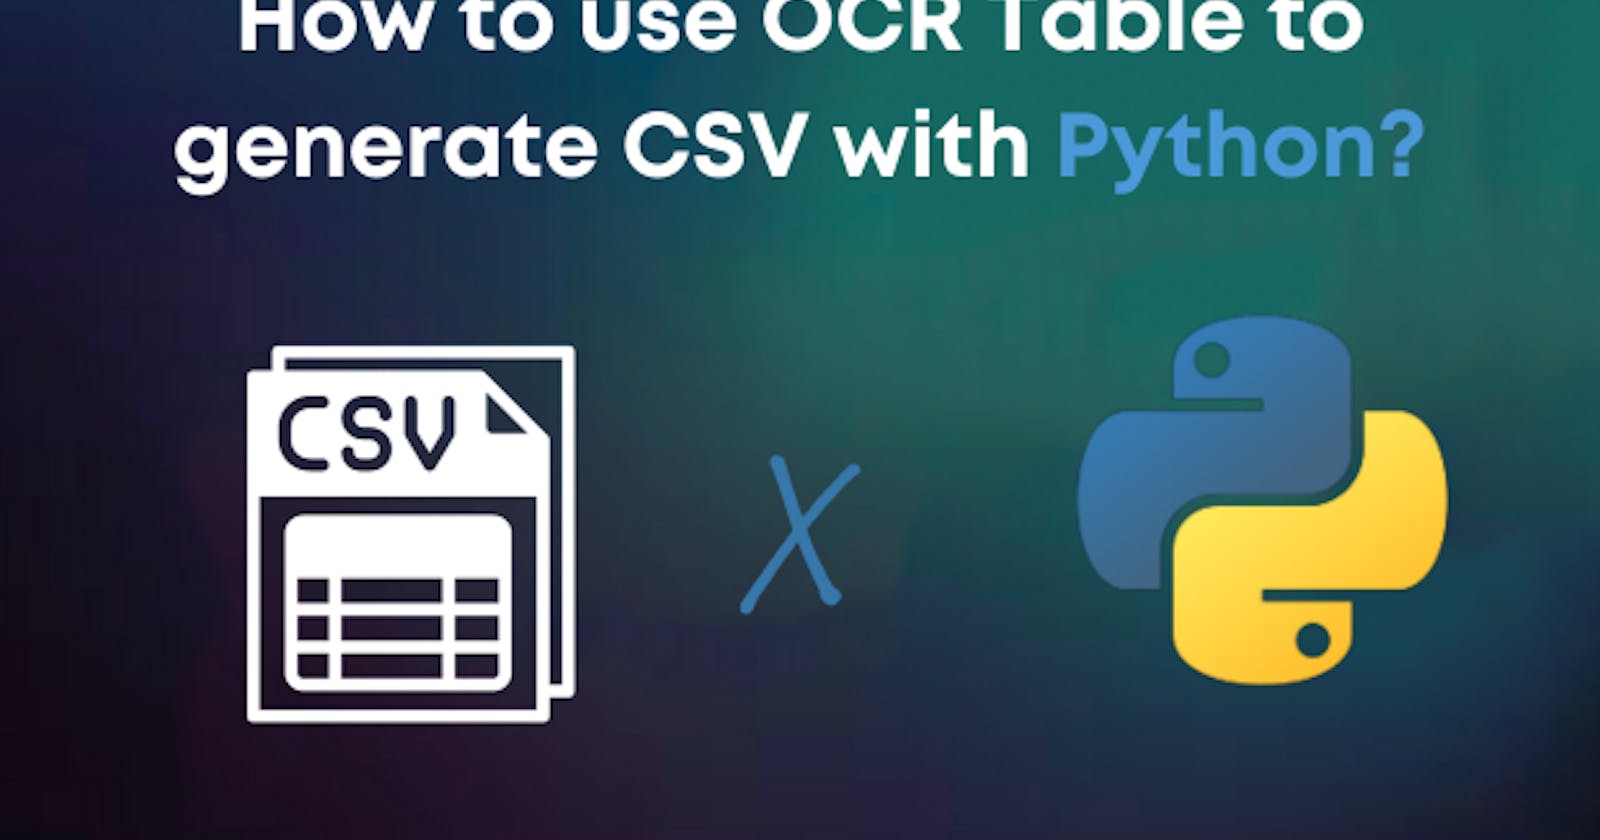 How to use OCR Table to generate CSV with Python